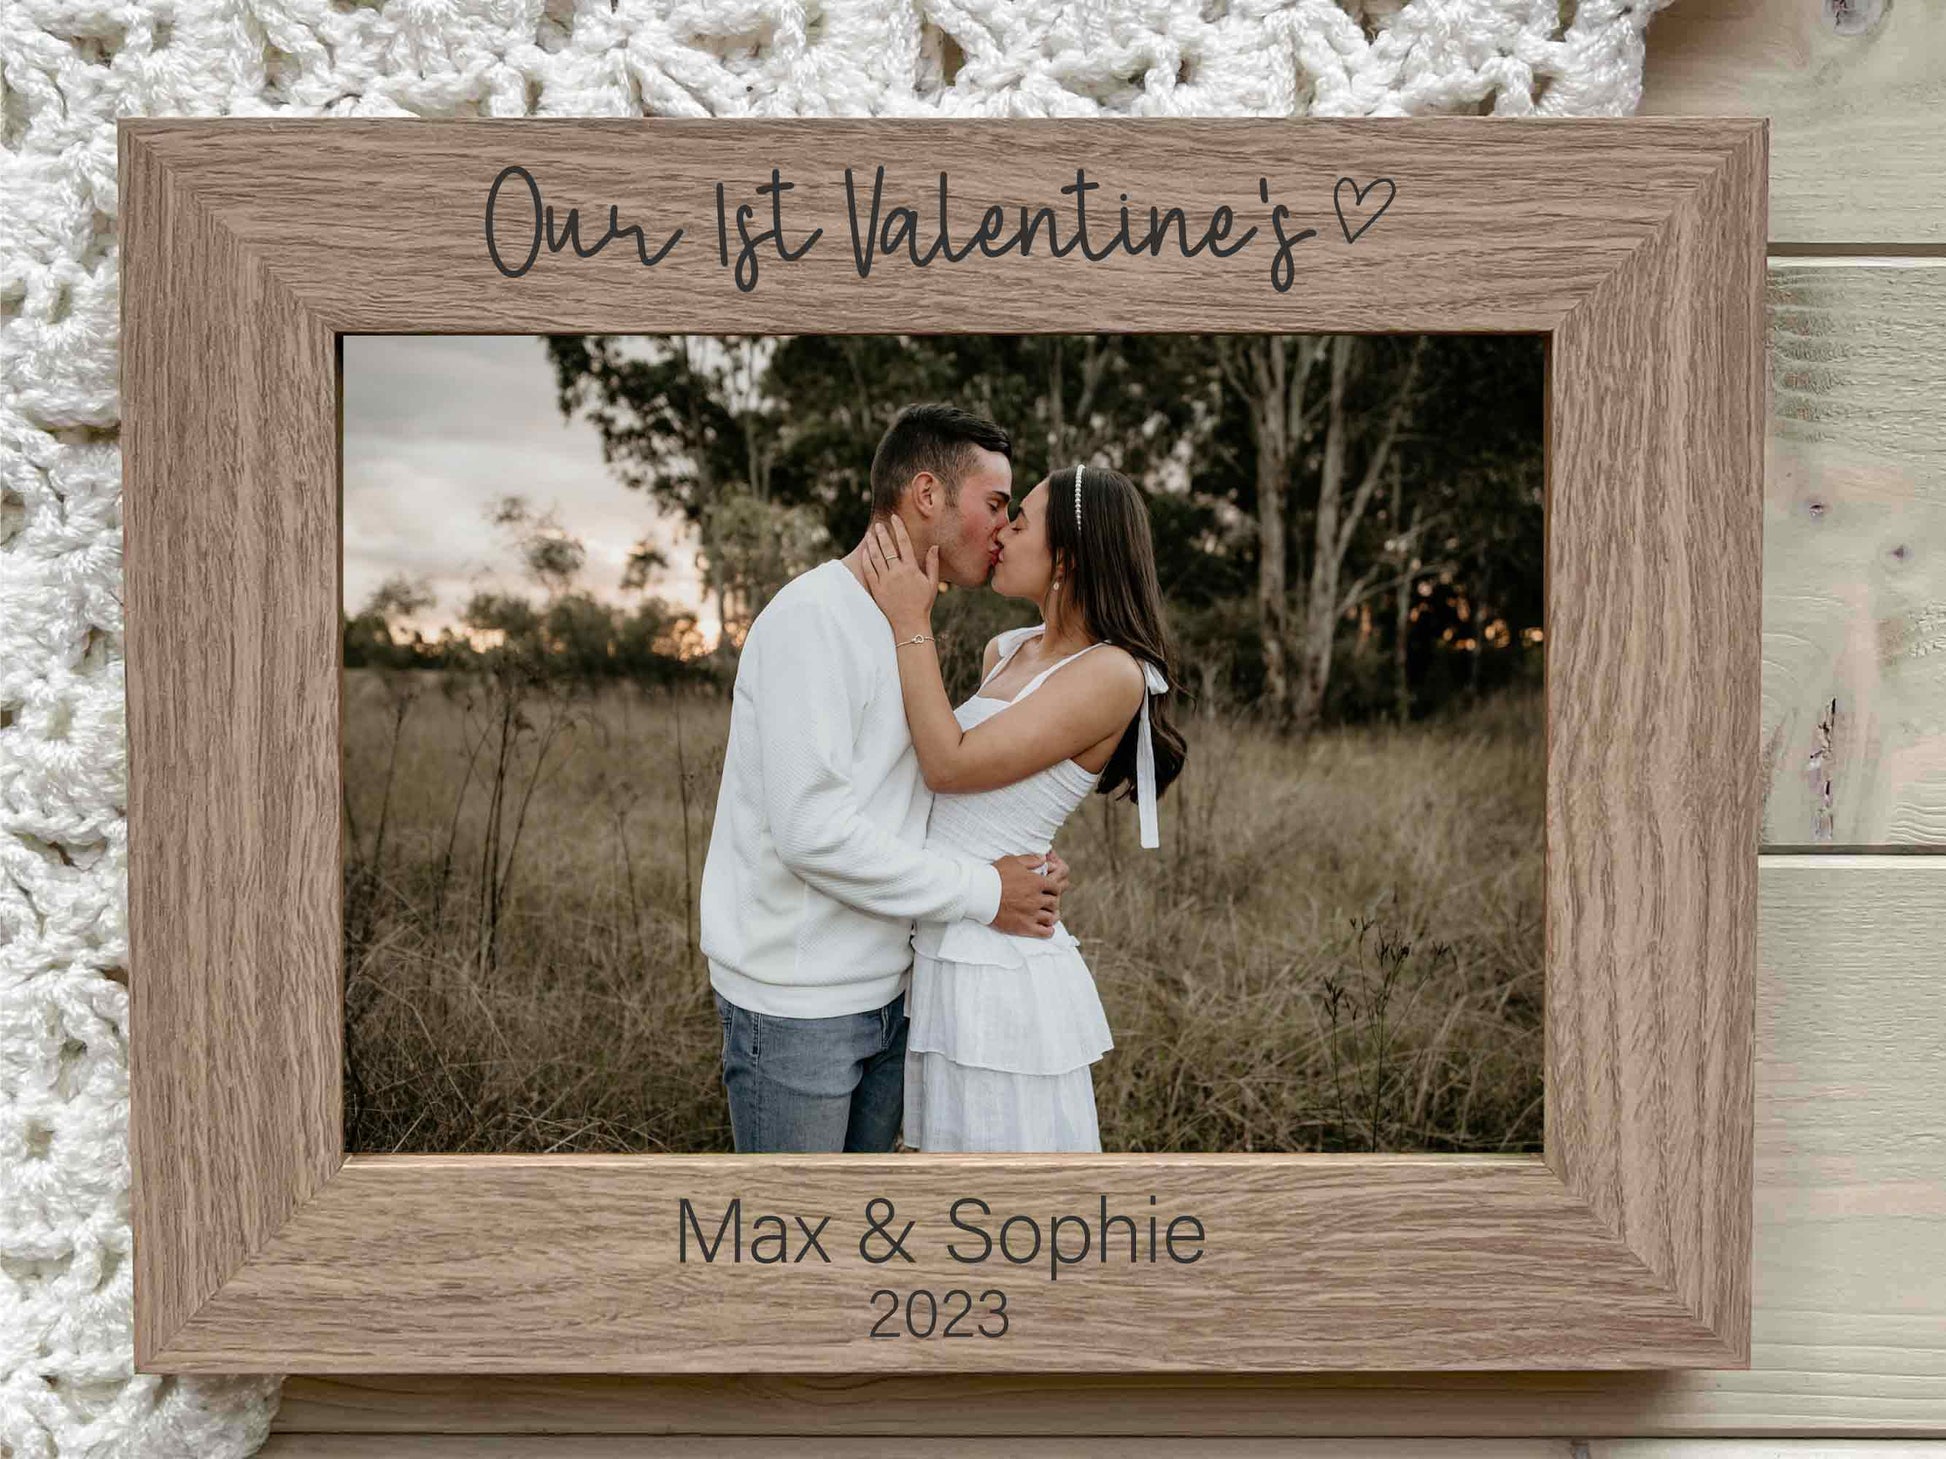 Our 1st Valentines Day Photo Frame